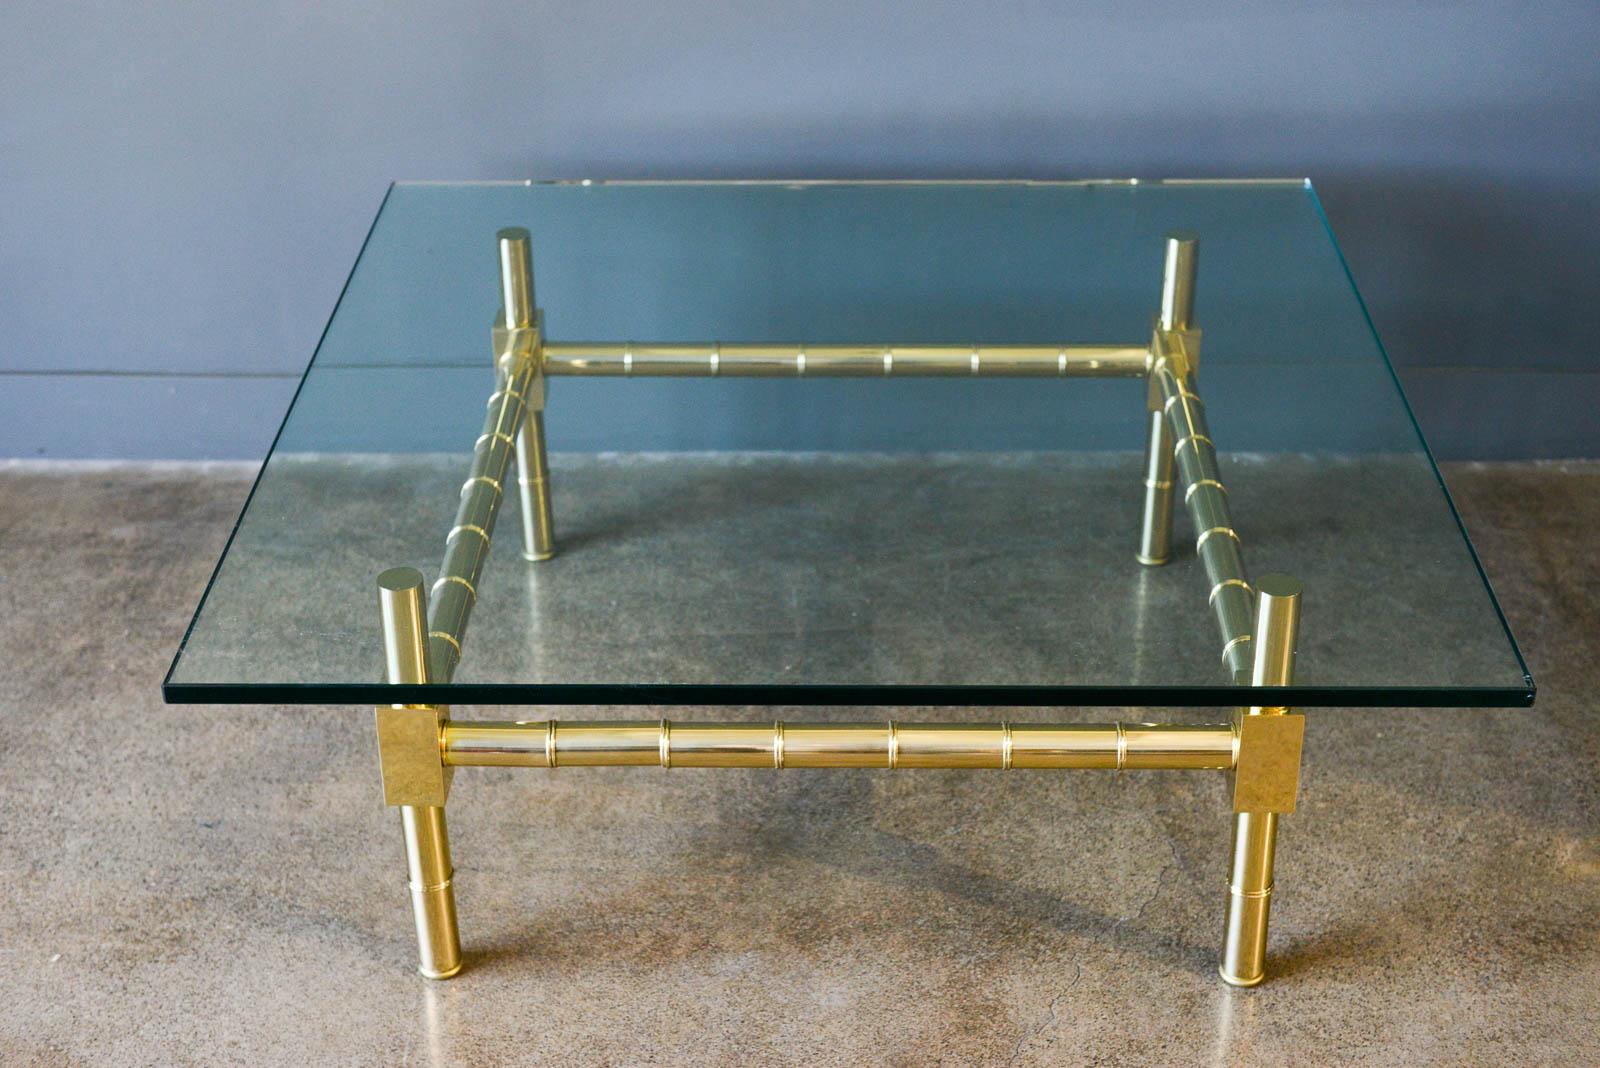 Hollywood Regency brass and glass coffee table by Mastercraft, ca. 1970. Beautifully refinished brass base with thick 3/4